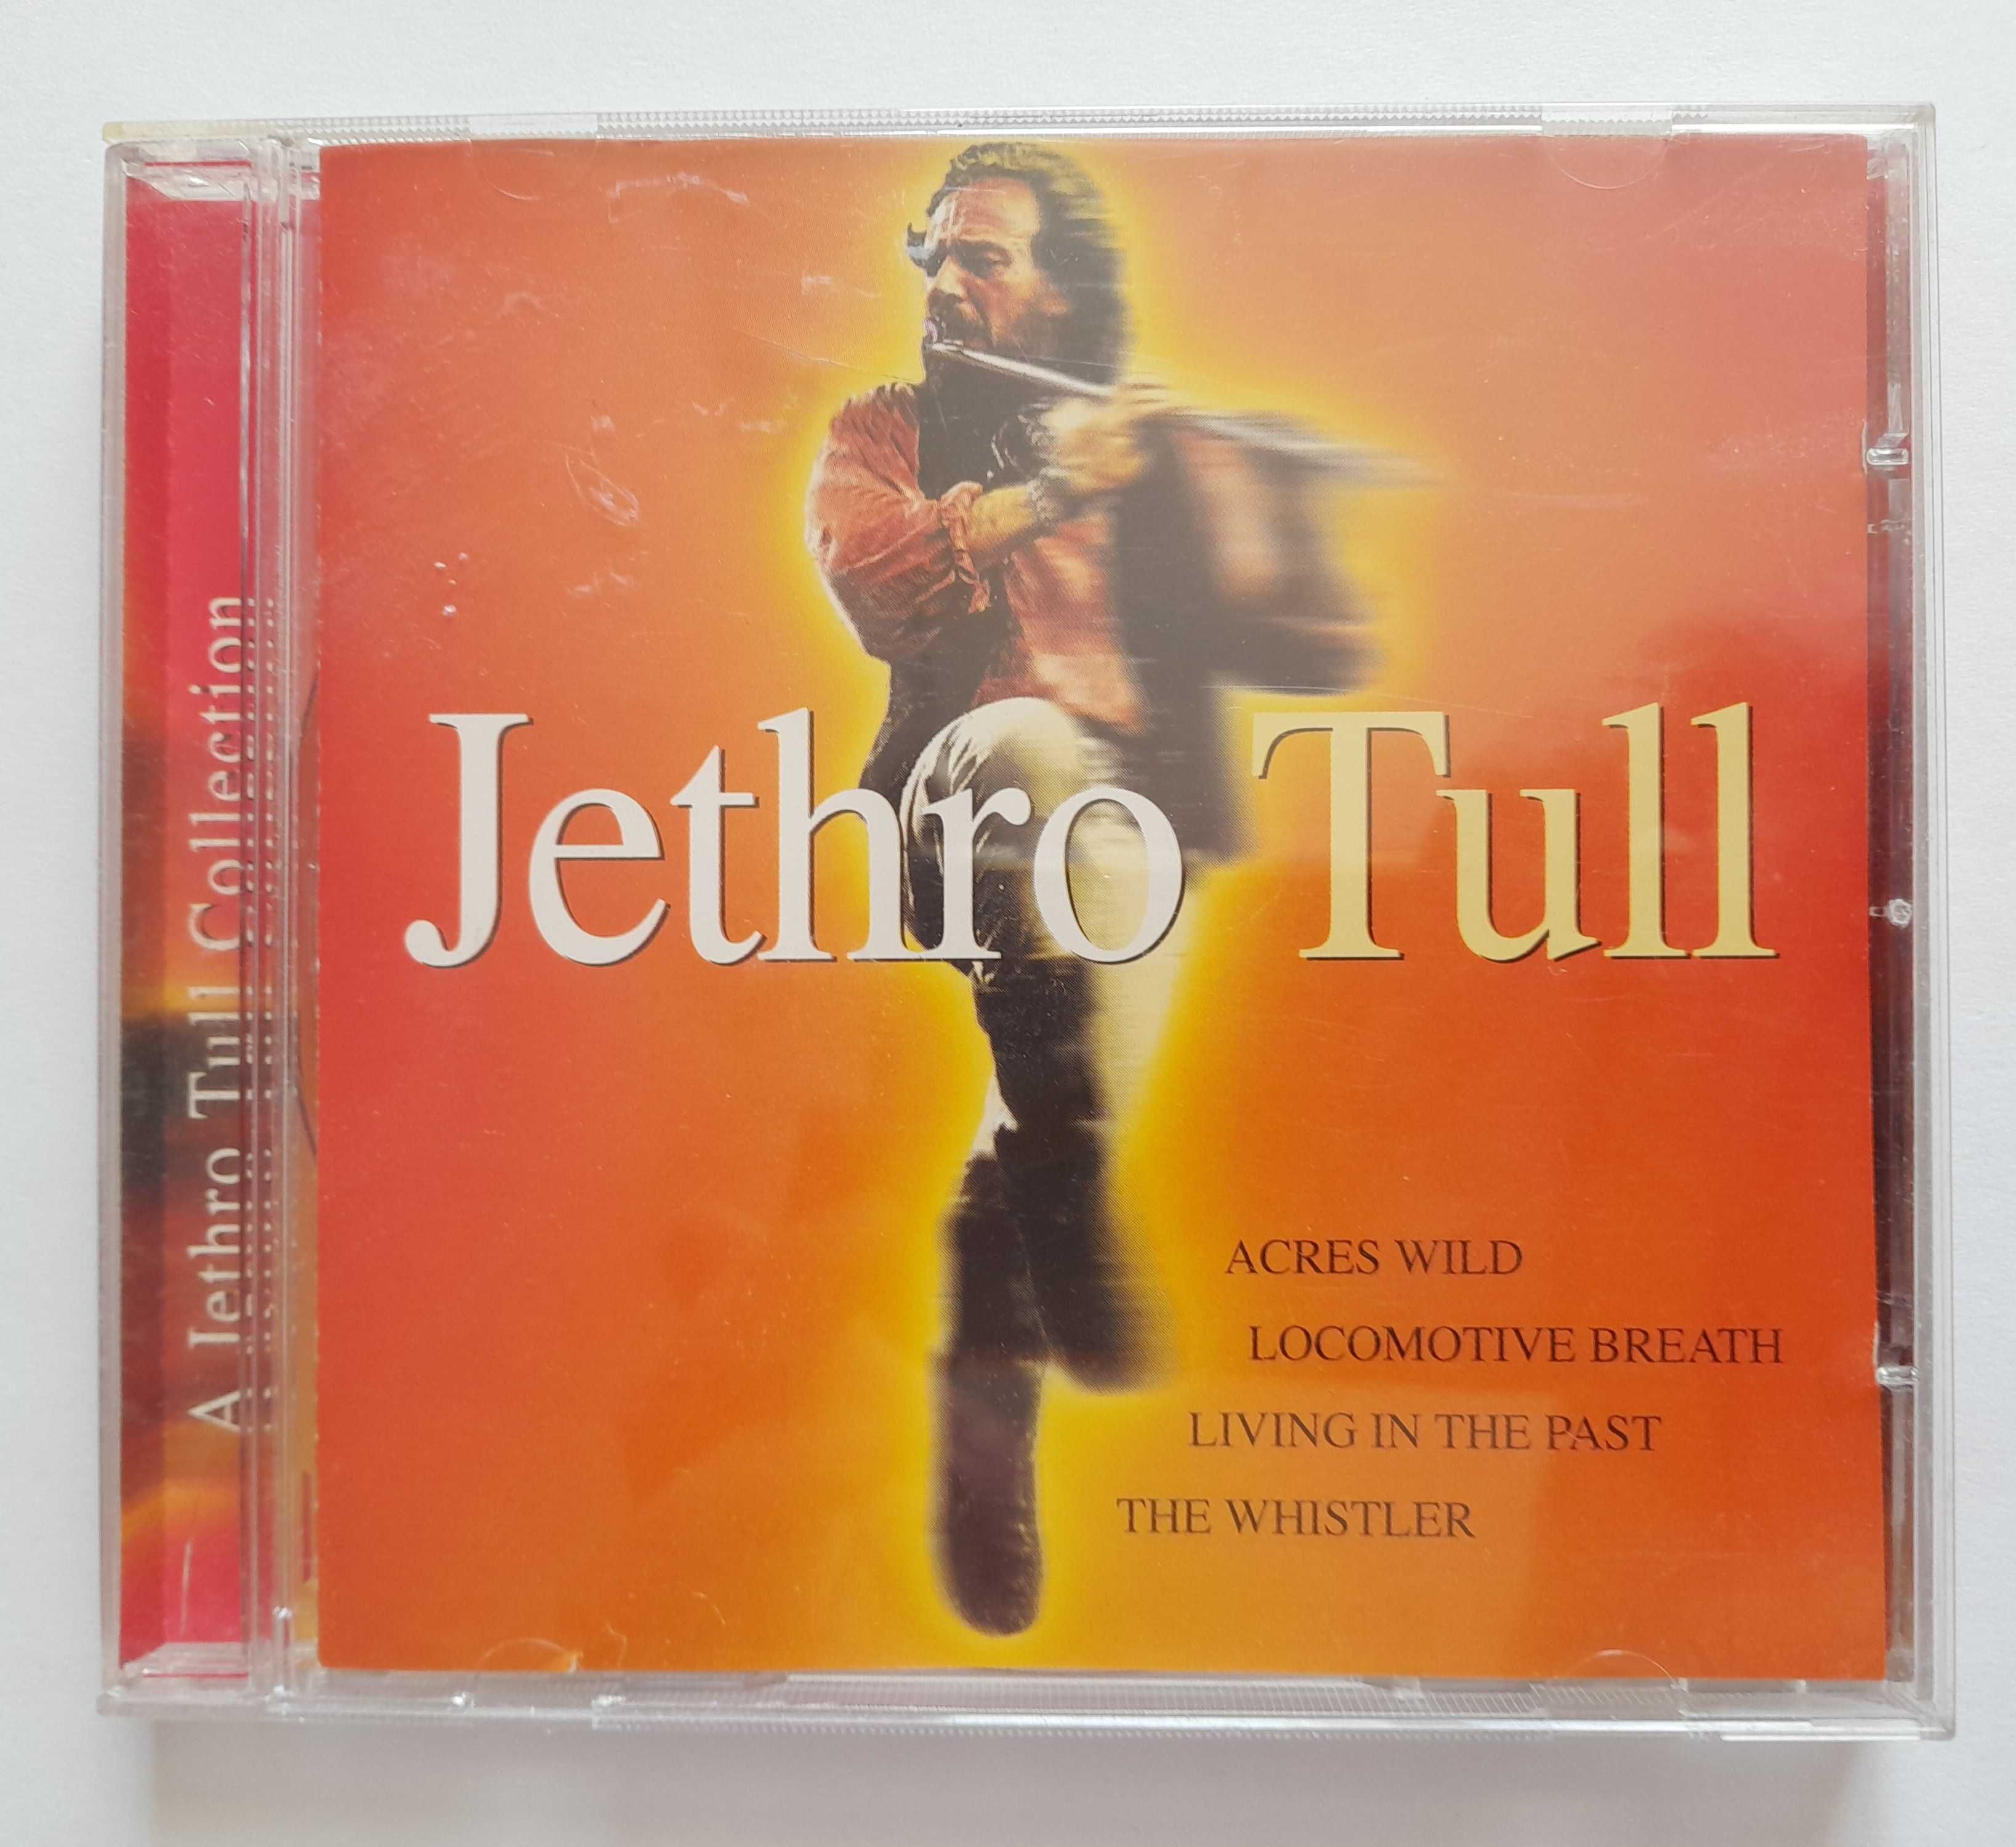 CD A Jethro Tull collection JETHRO TULL